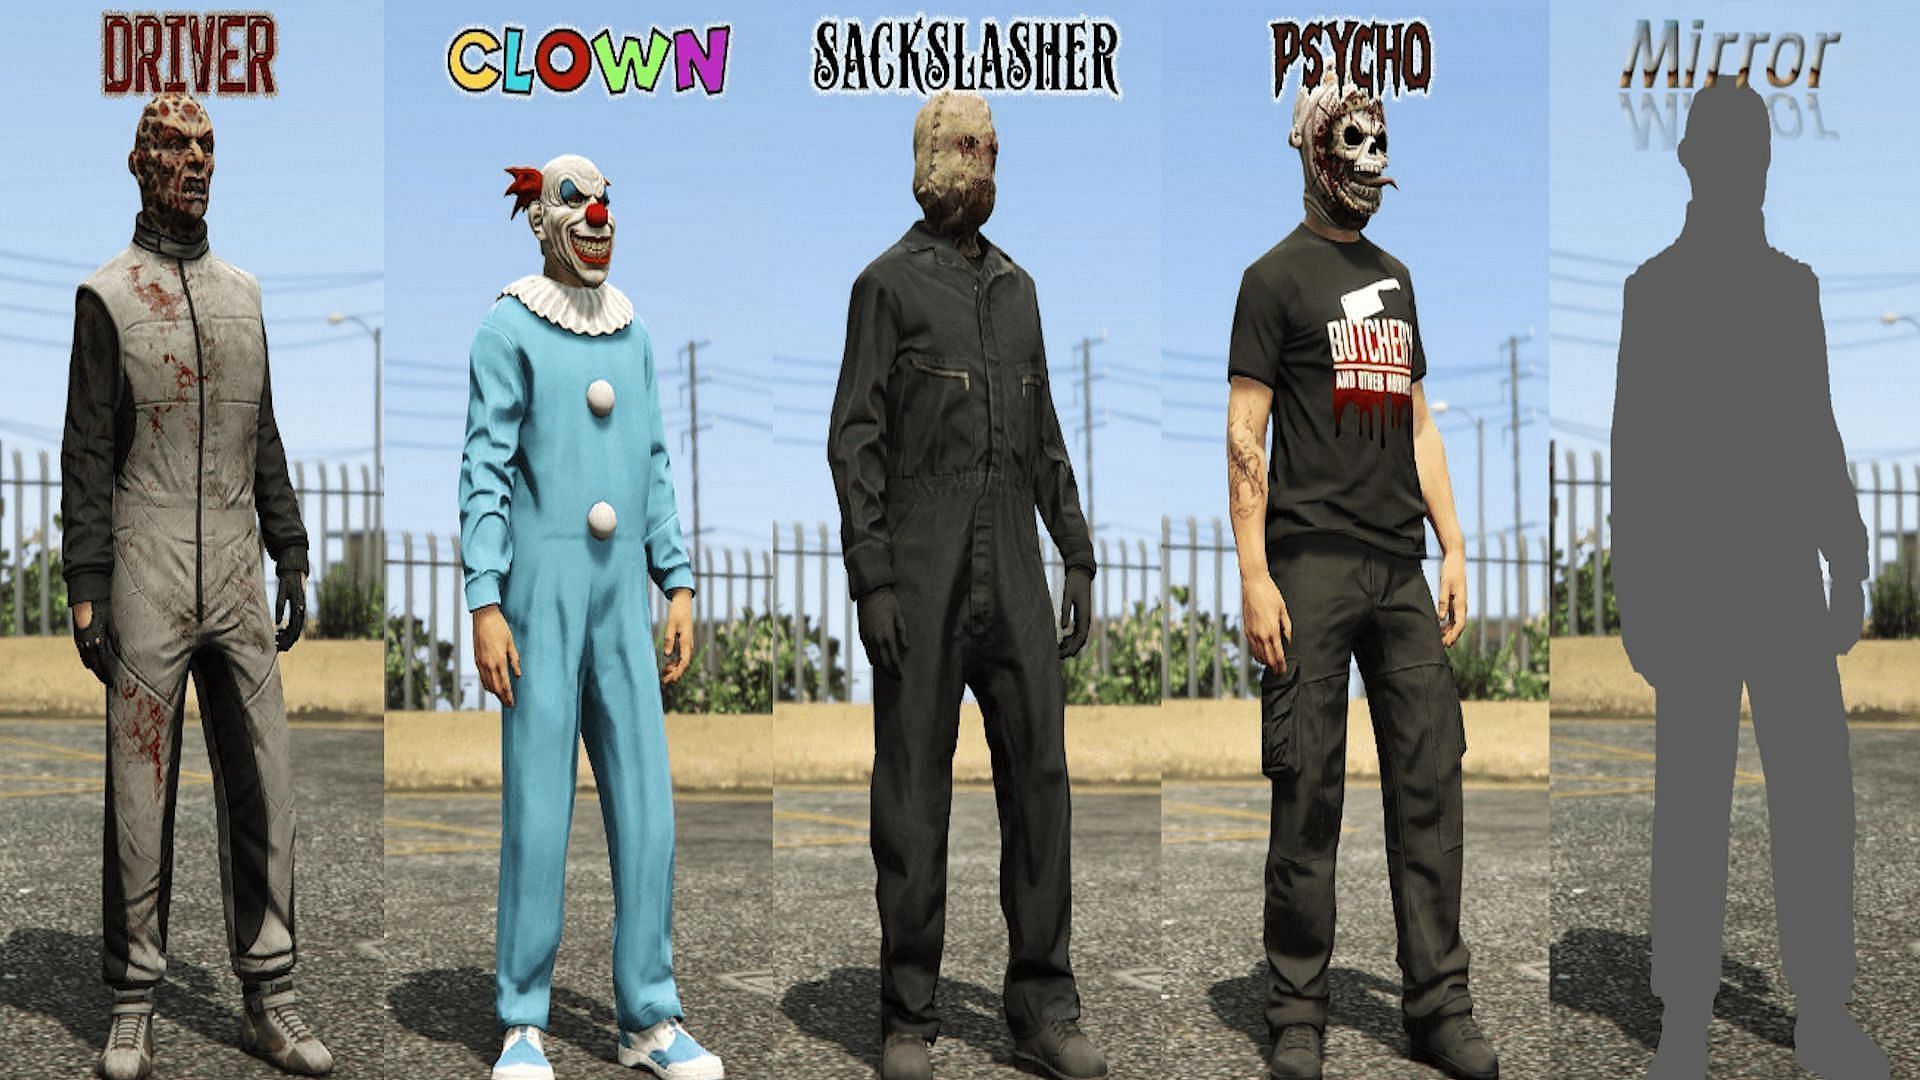 These are the Slashers that can attack you (Image via monkeypolice188, GTAWeb.eu)